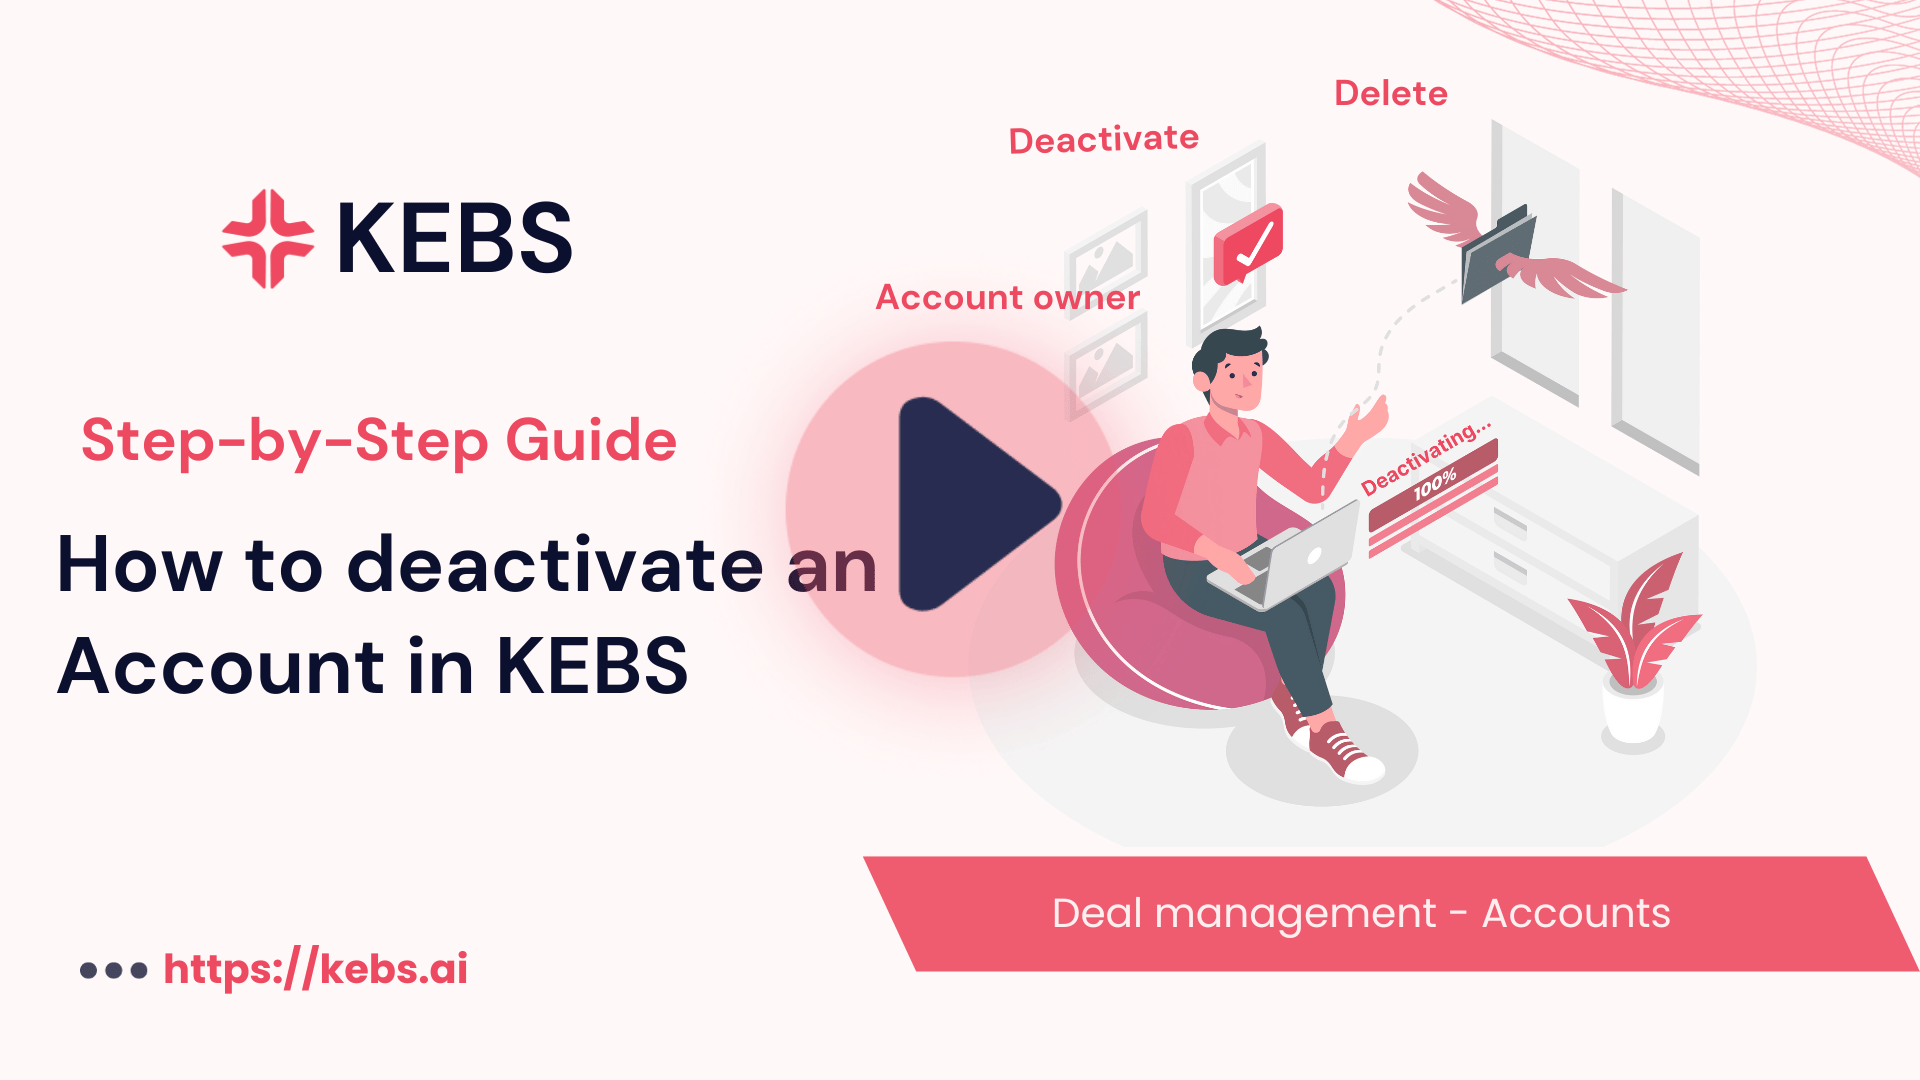 How to deactivate an Account in KEBS